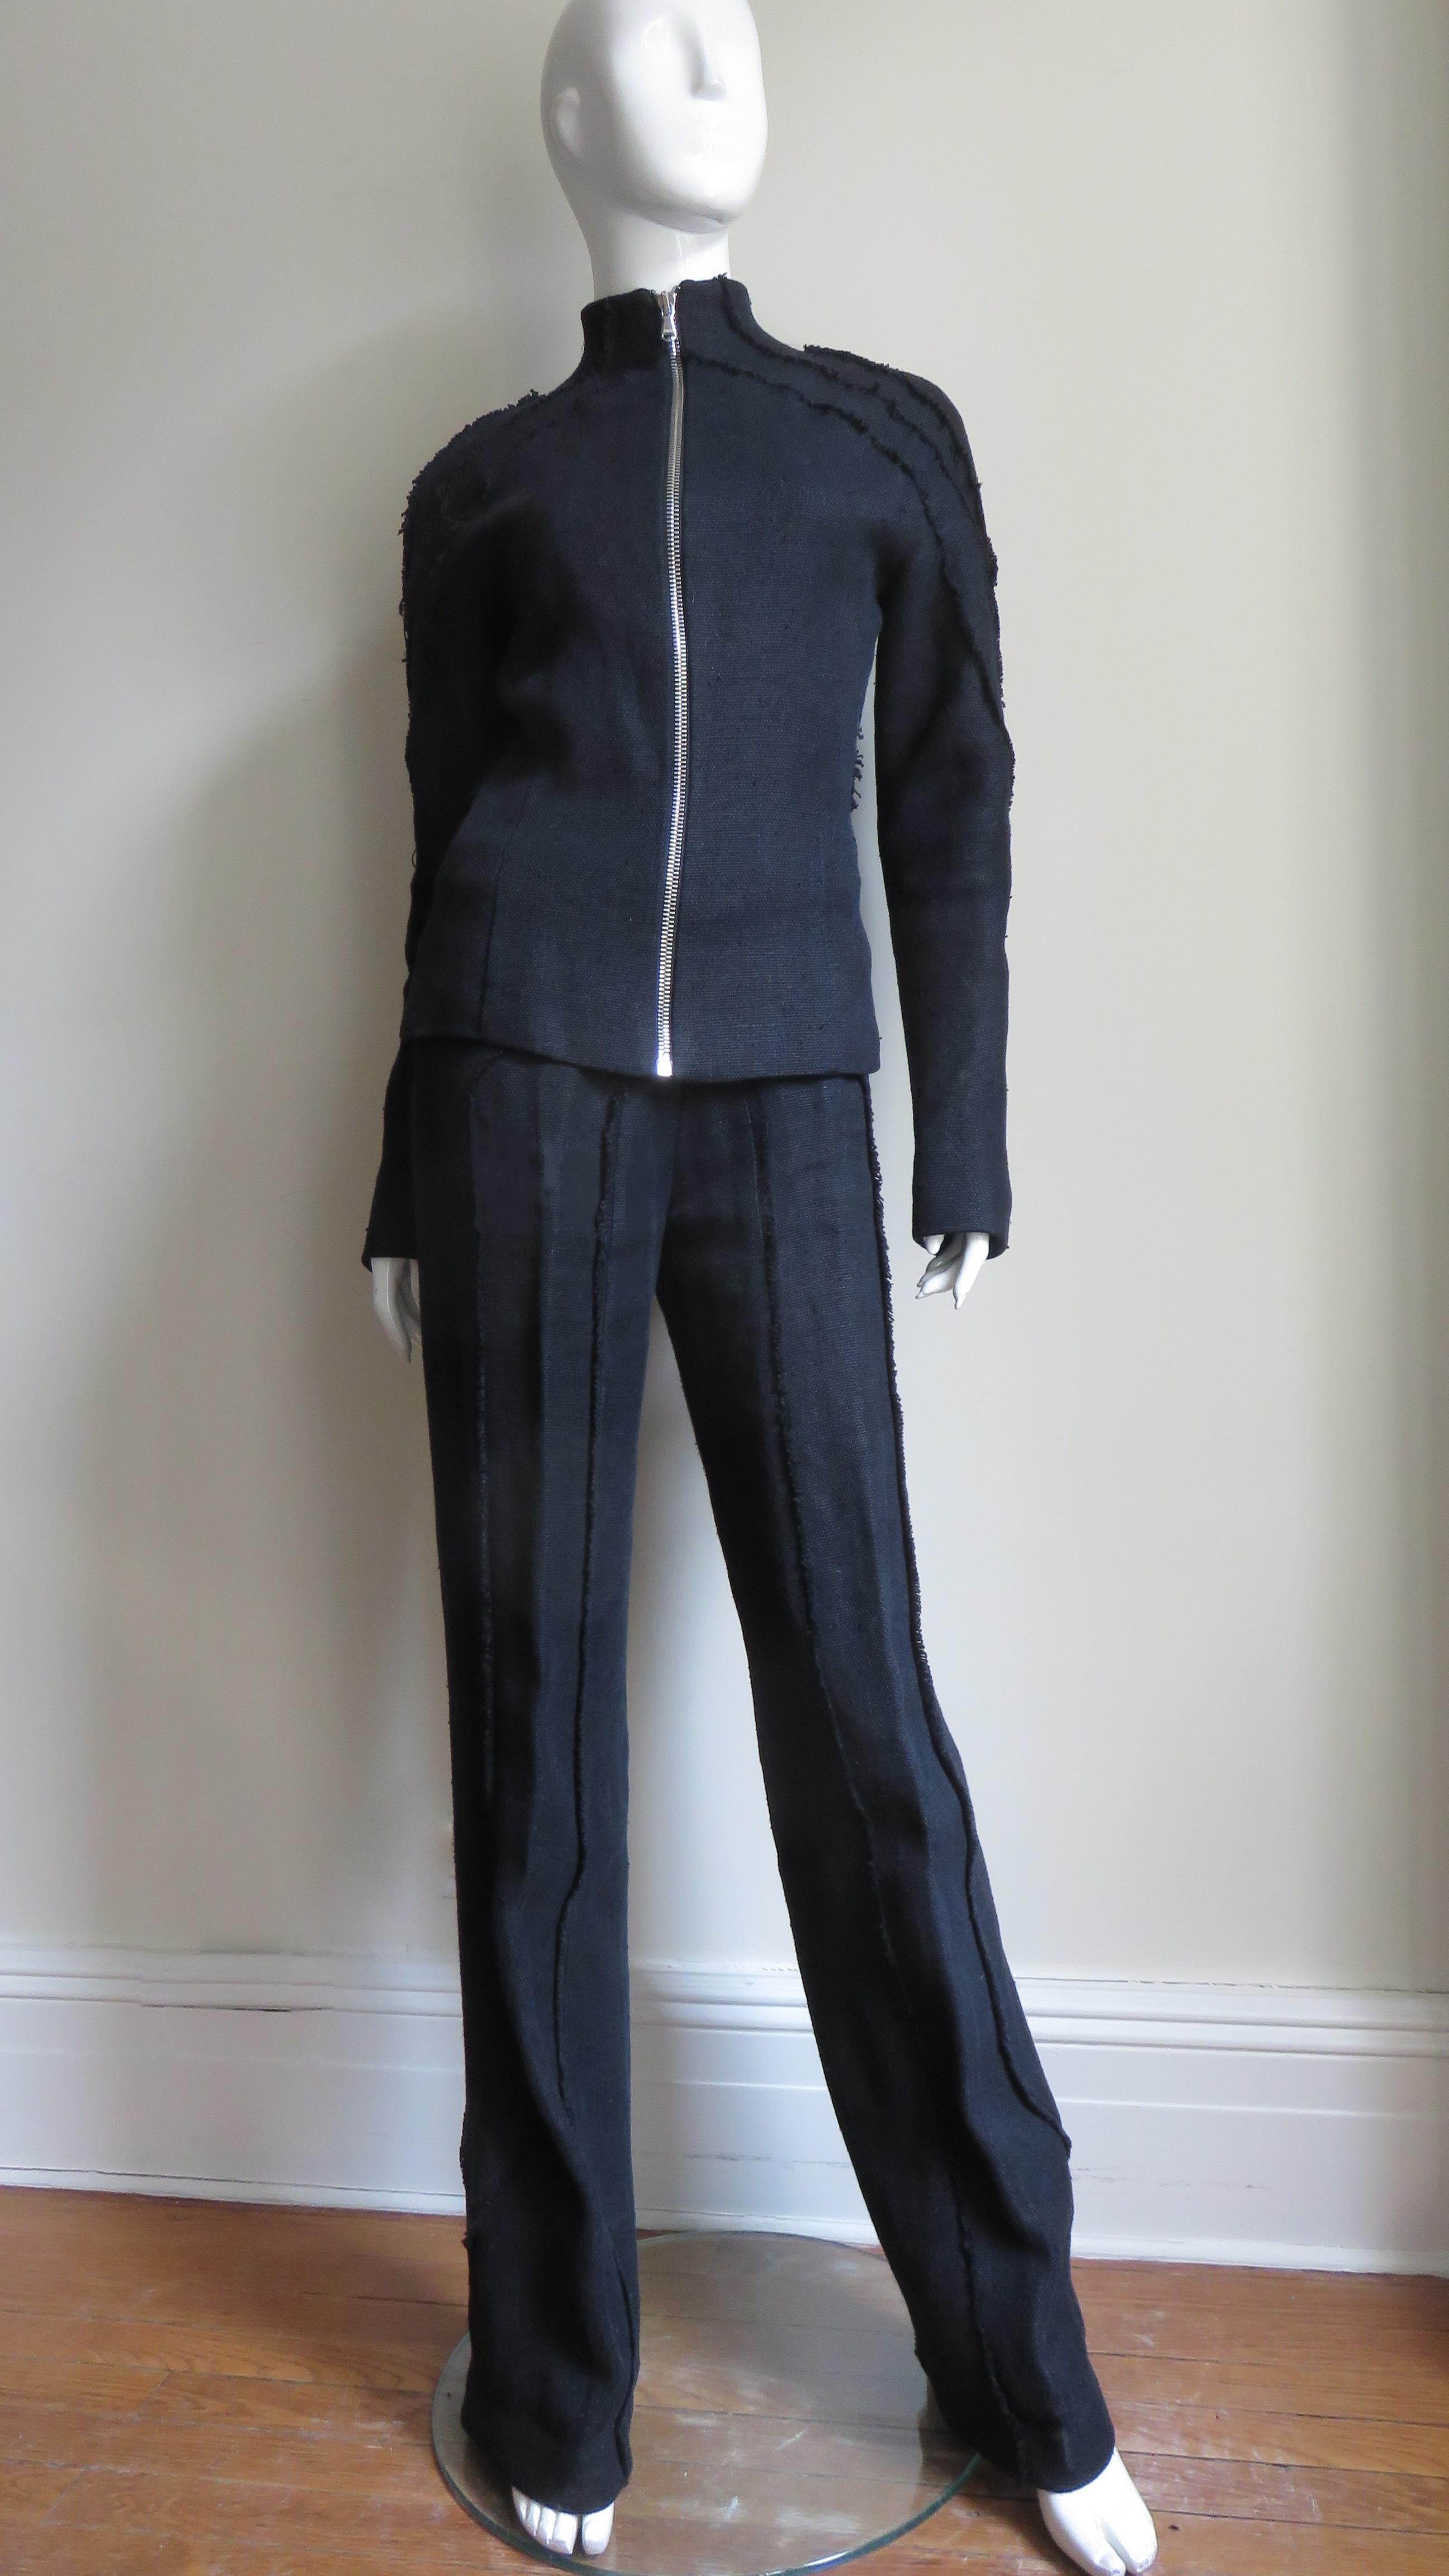 Alexander McQueen New Elaborately Seamed Jacket and Pants A/W 1999 For Sale 3